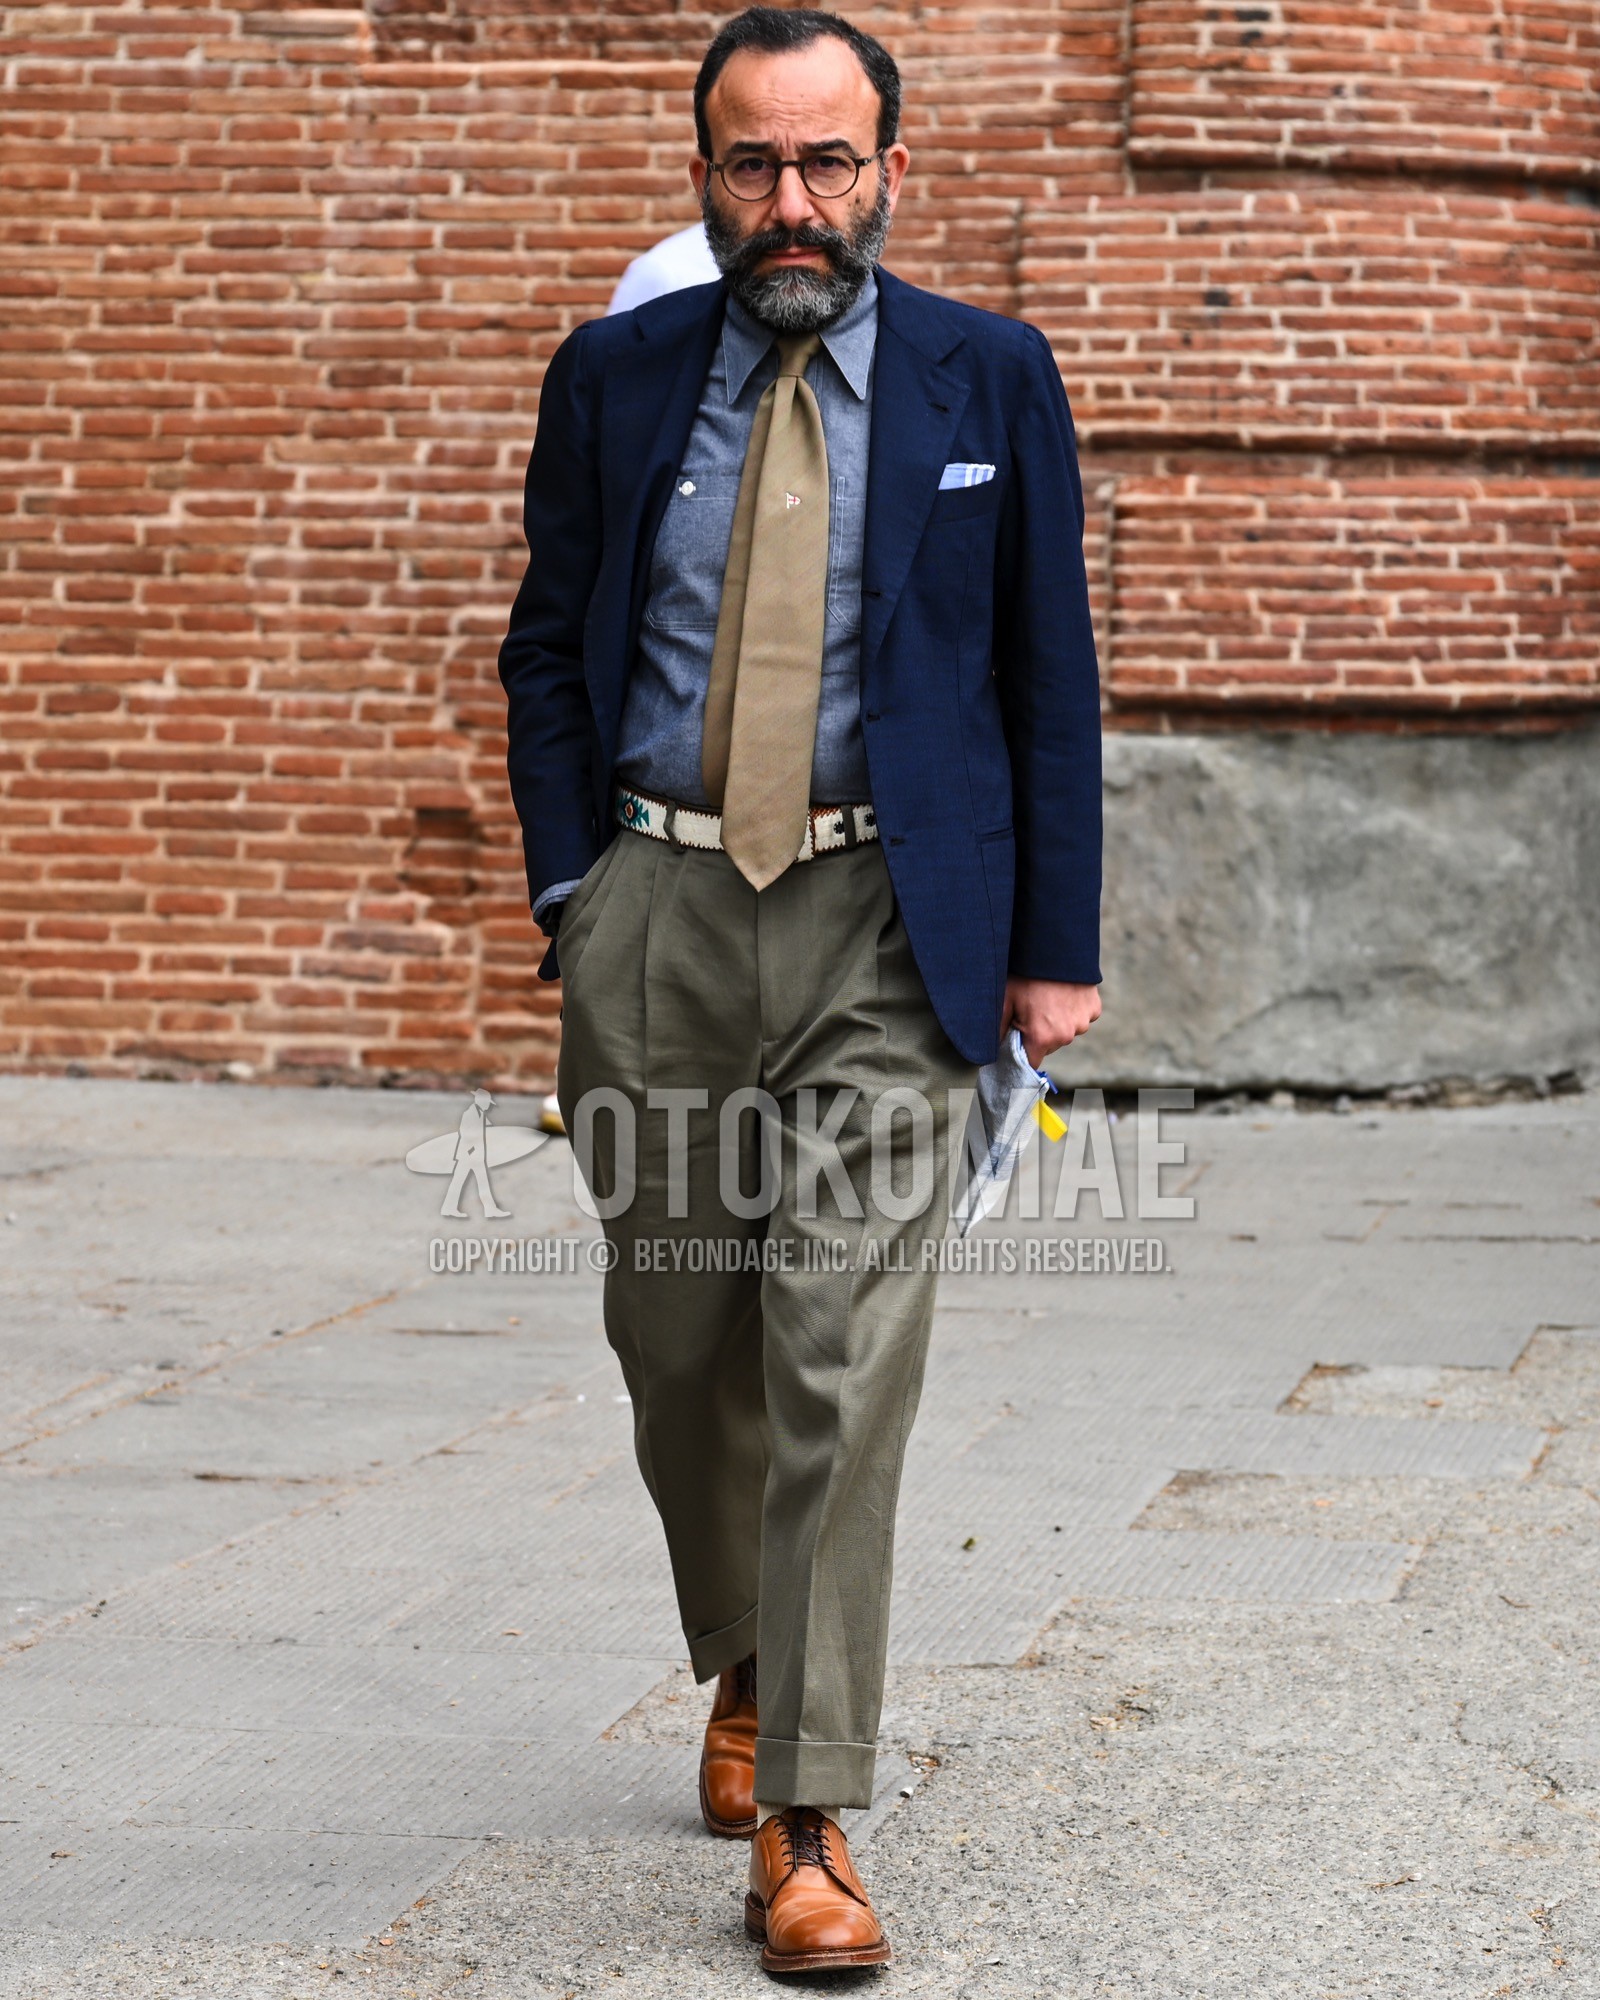 Men's spring summer autumn outfit with clear plain sunglasses, navy plain tailored jacket, light blue plain denim shirt/chambray shirt, white belt leather belt, olive green plain chinos, olive green plain pleated pants, brown plain toe leather shoes.